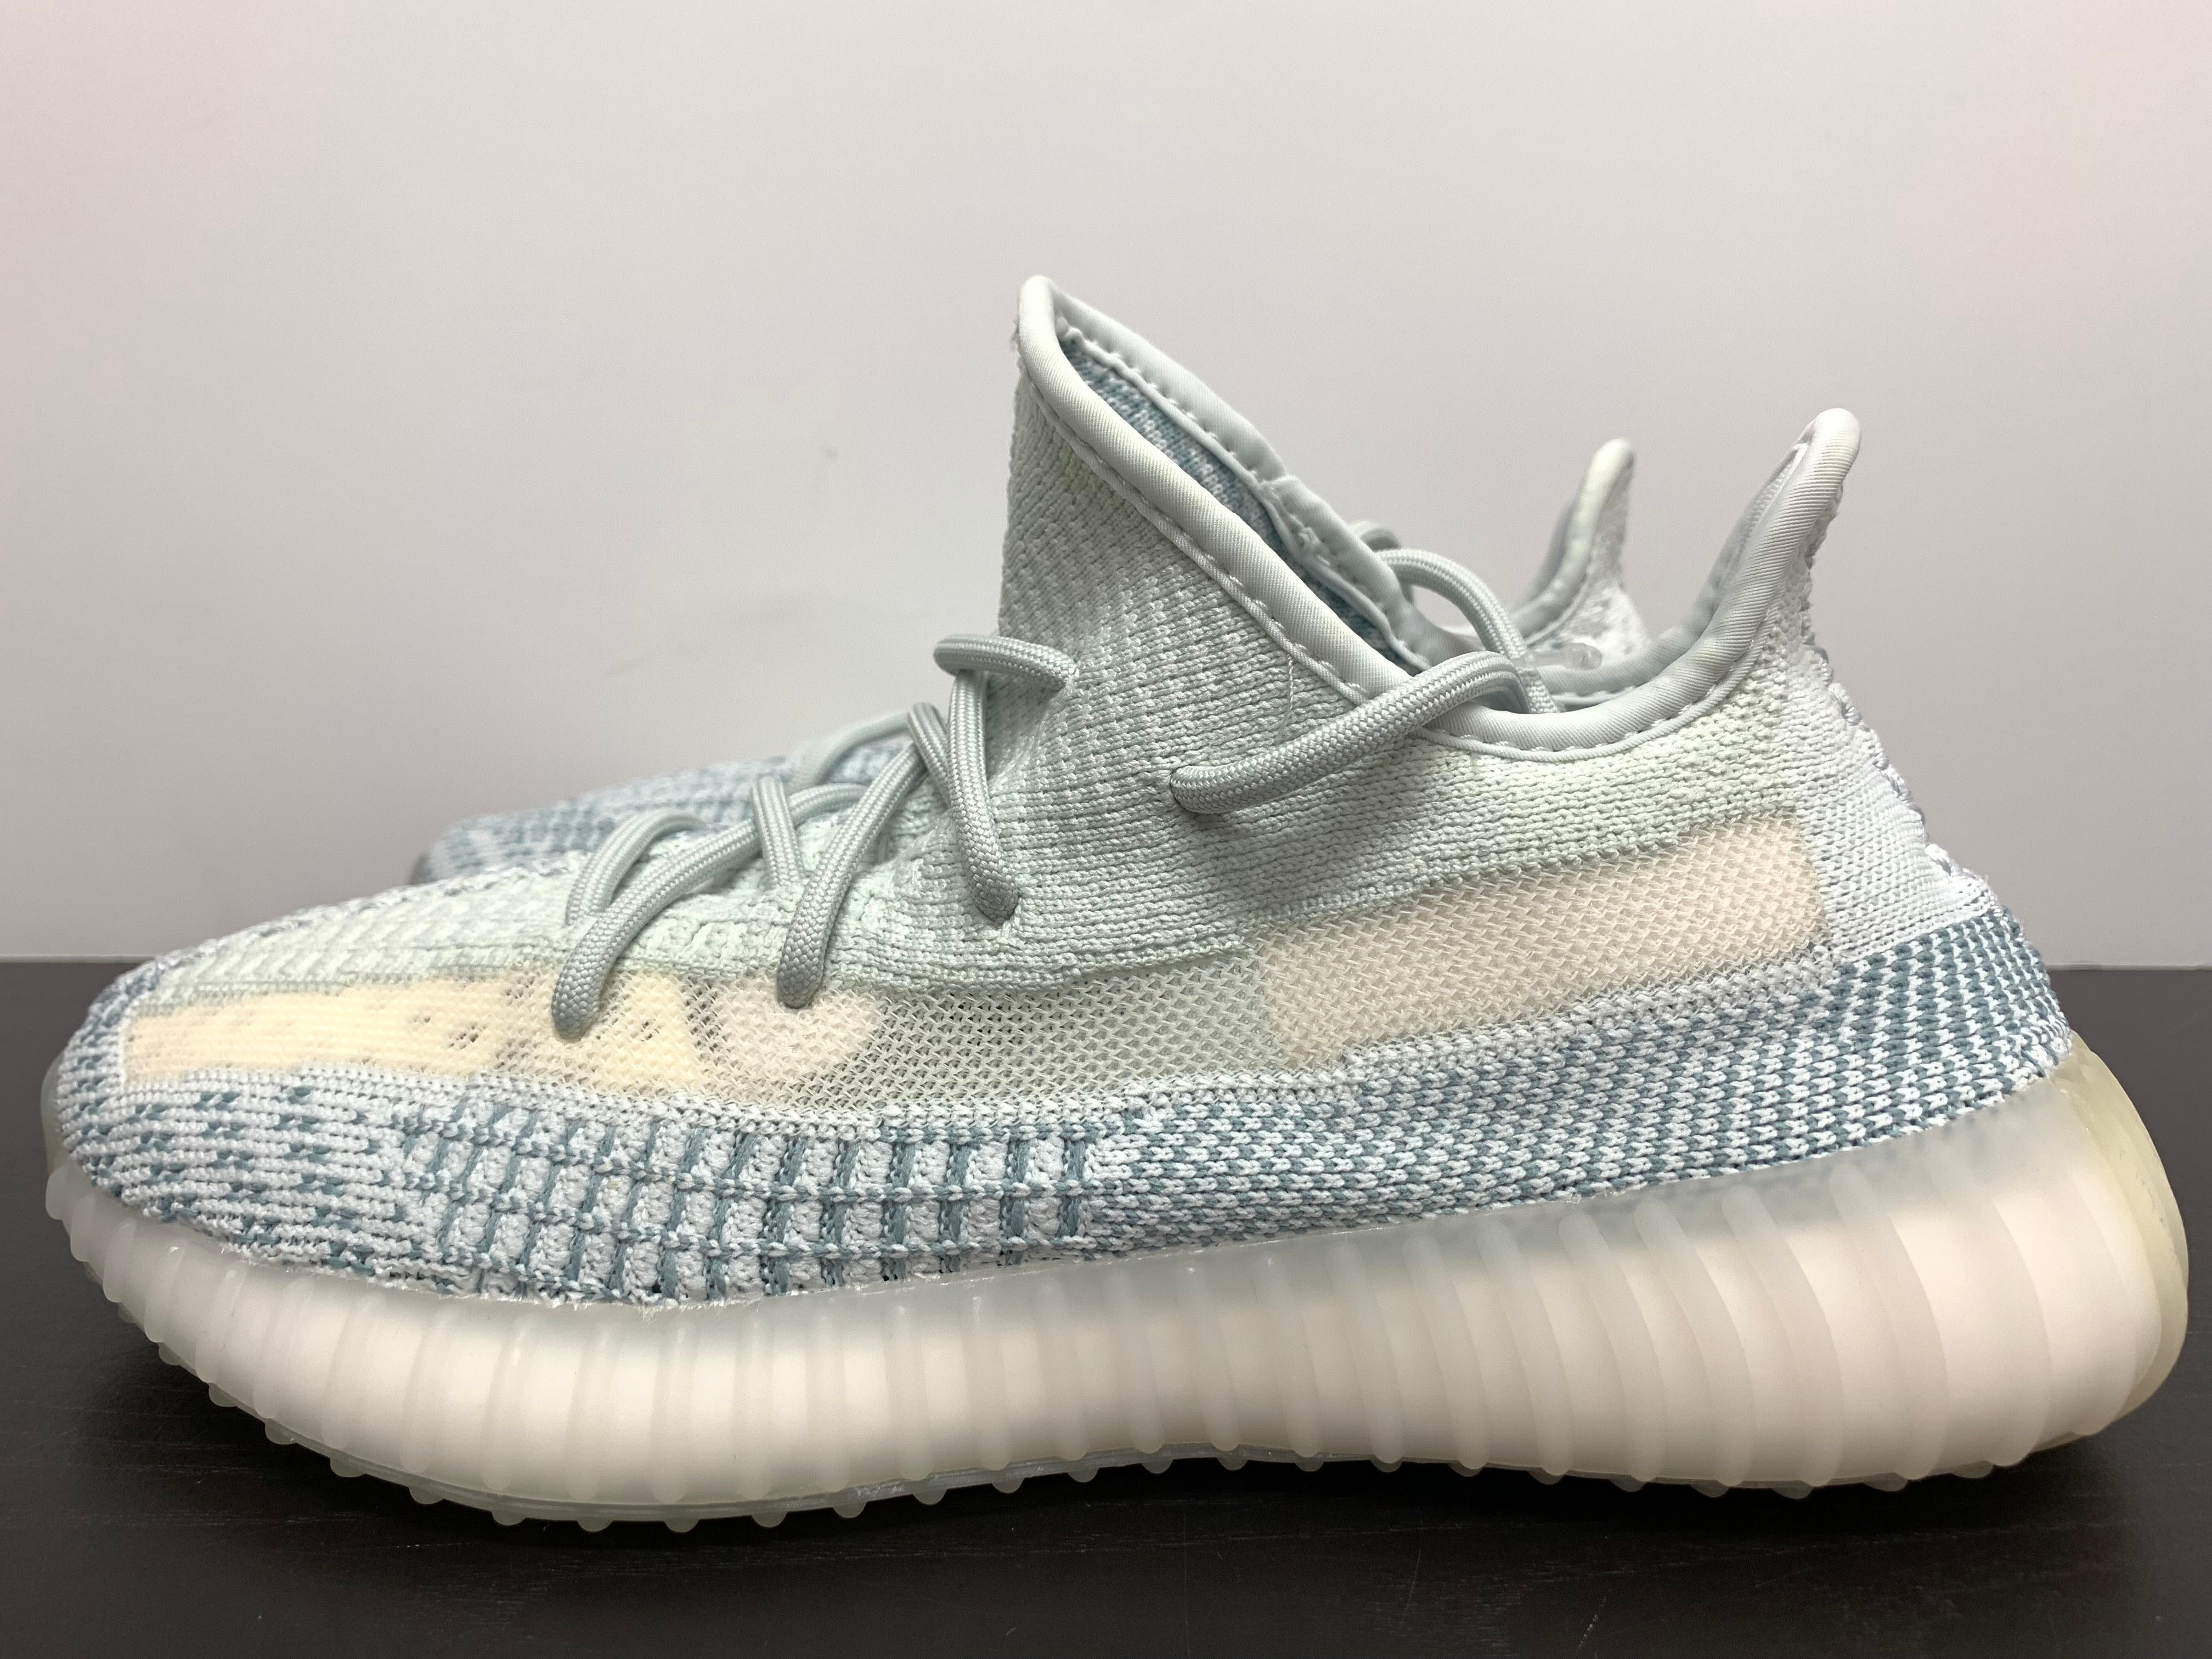 Adidas Yeezy Boost 350 V2 Cloud White Non Reflective Chillykicks